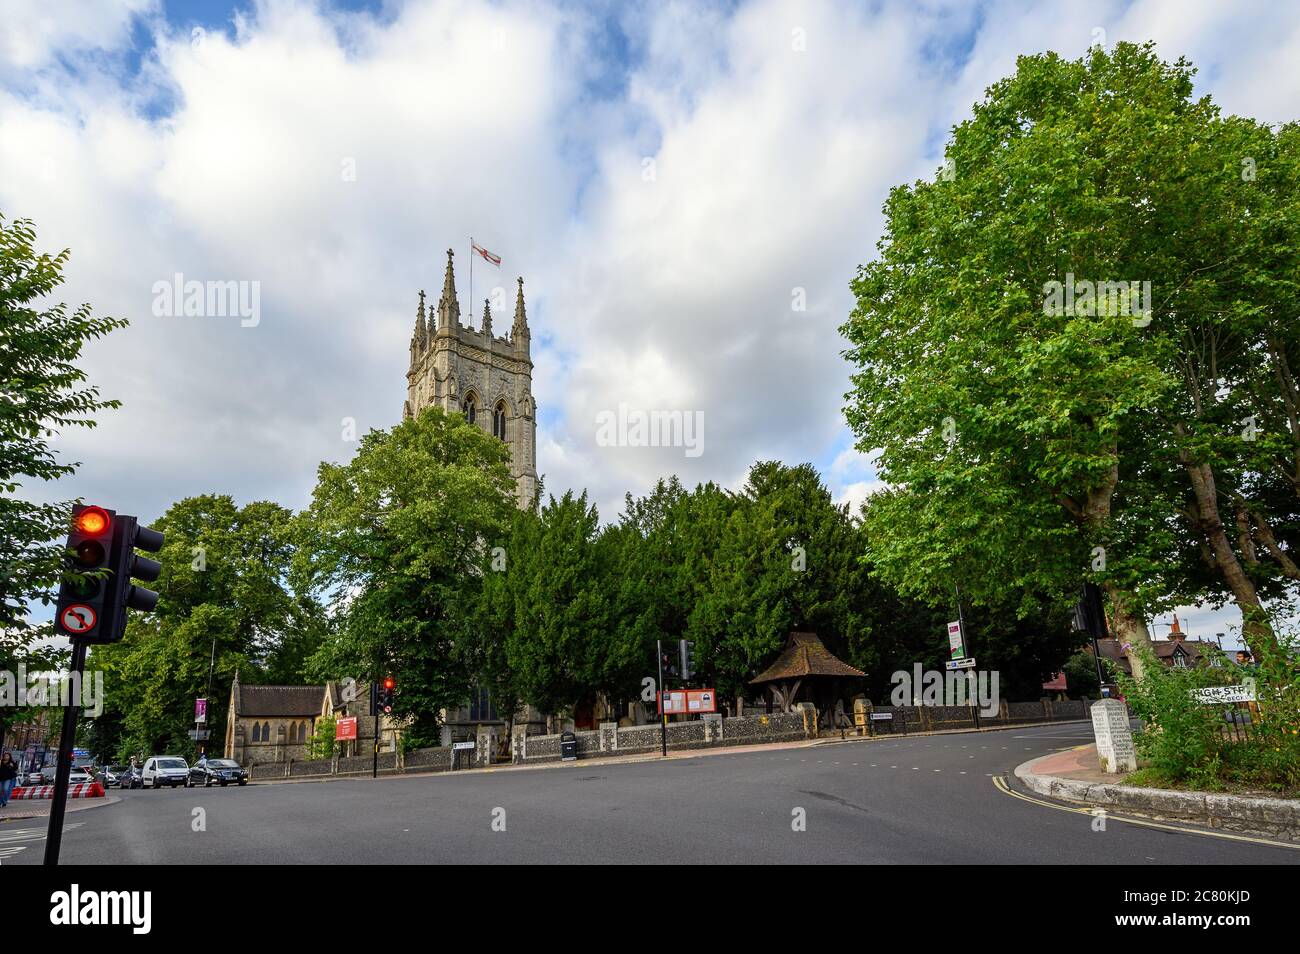 Beckenham (Greater London), Kent, UK. St George's Church in Beckenham at the junction of the High Street, Bromley Road and Church Avenue. Stock Photo